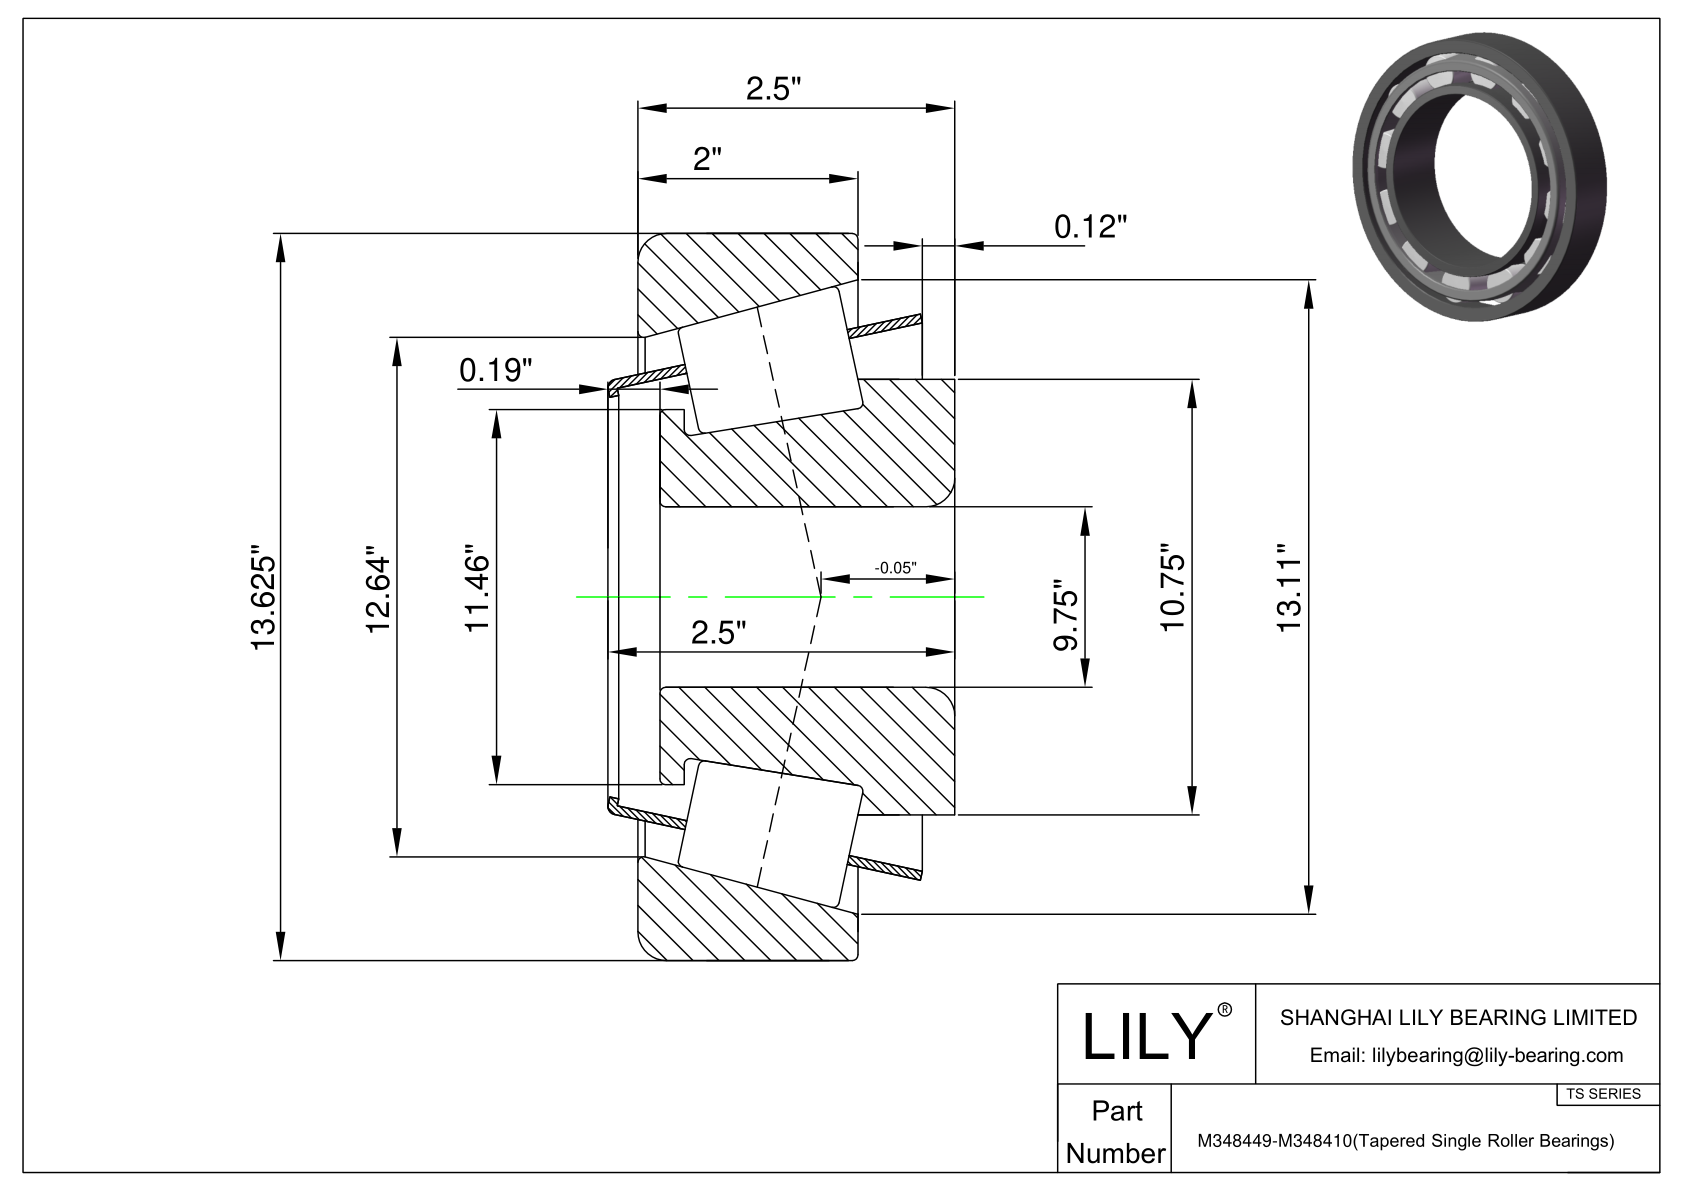 M348449-M348410 TS (Tapered Single Roller Bearings) (Imperial) cad drawing